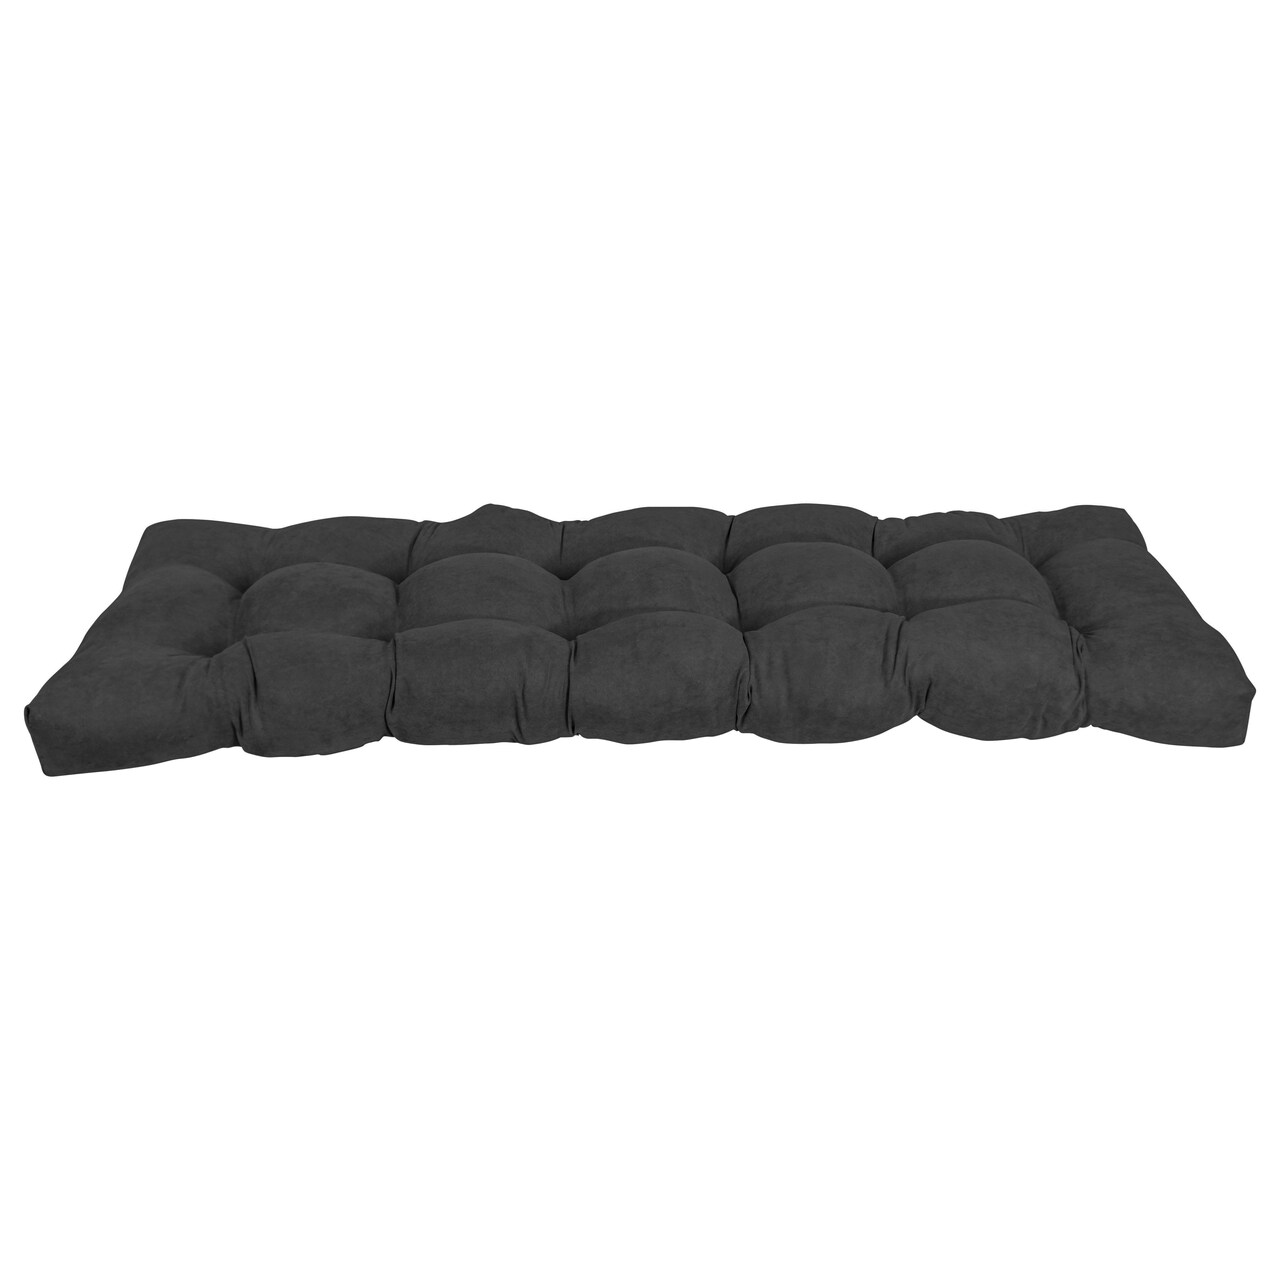 60-inch by 19-inch Tufted Solid Microsuede Bench Cushion Black-Color